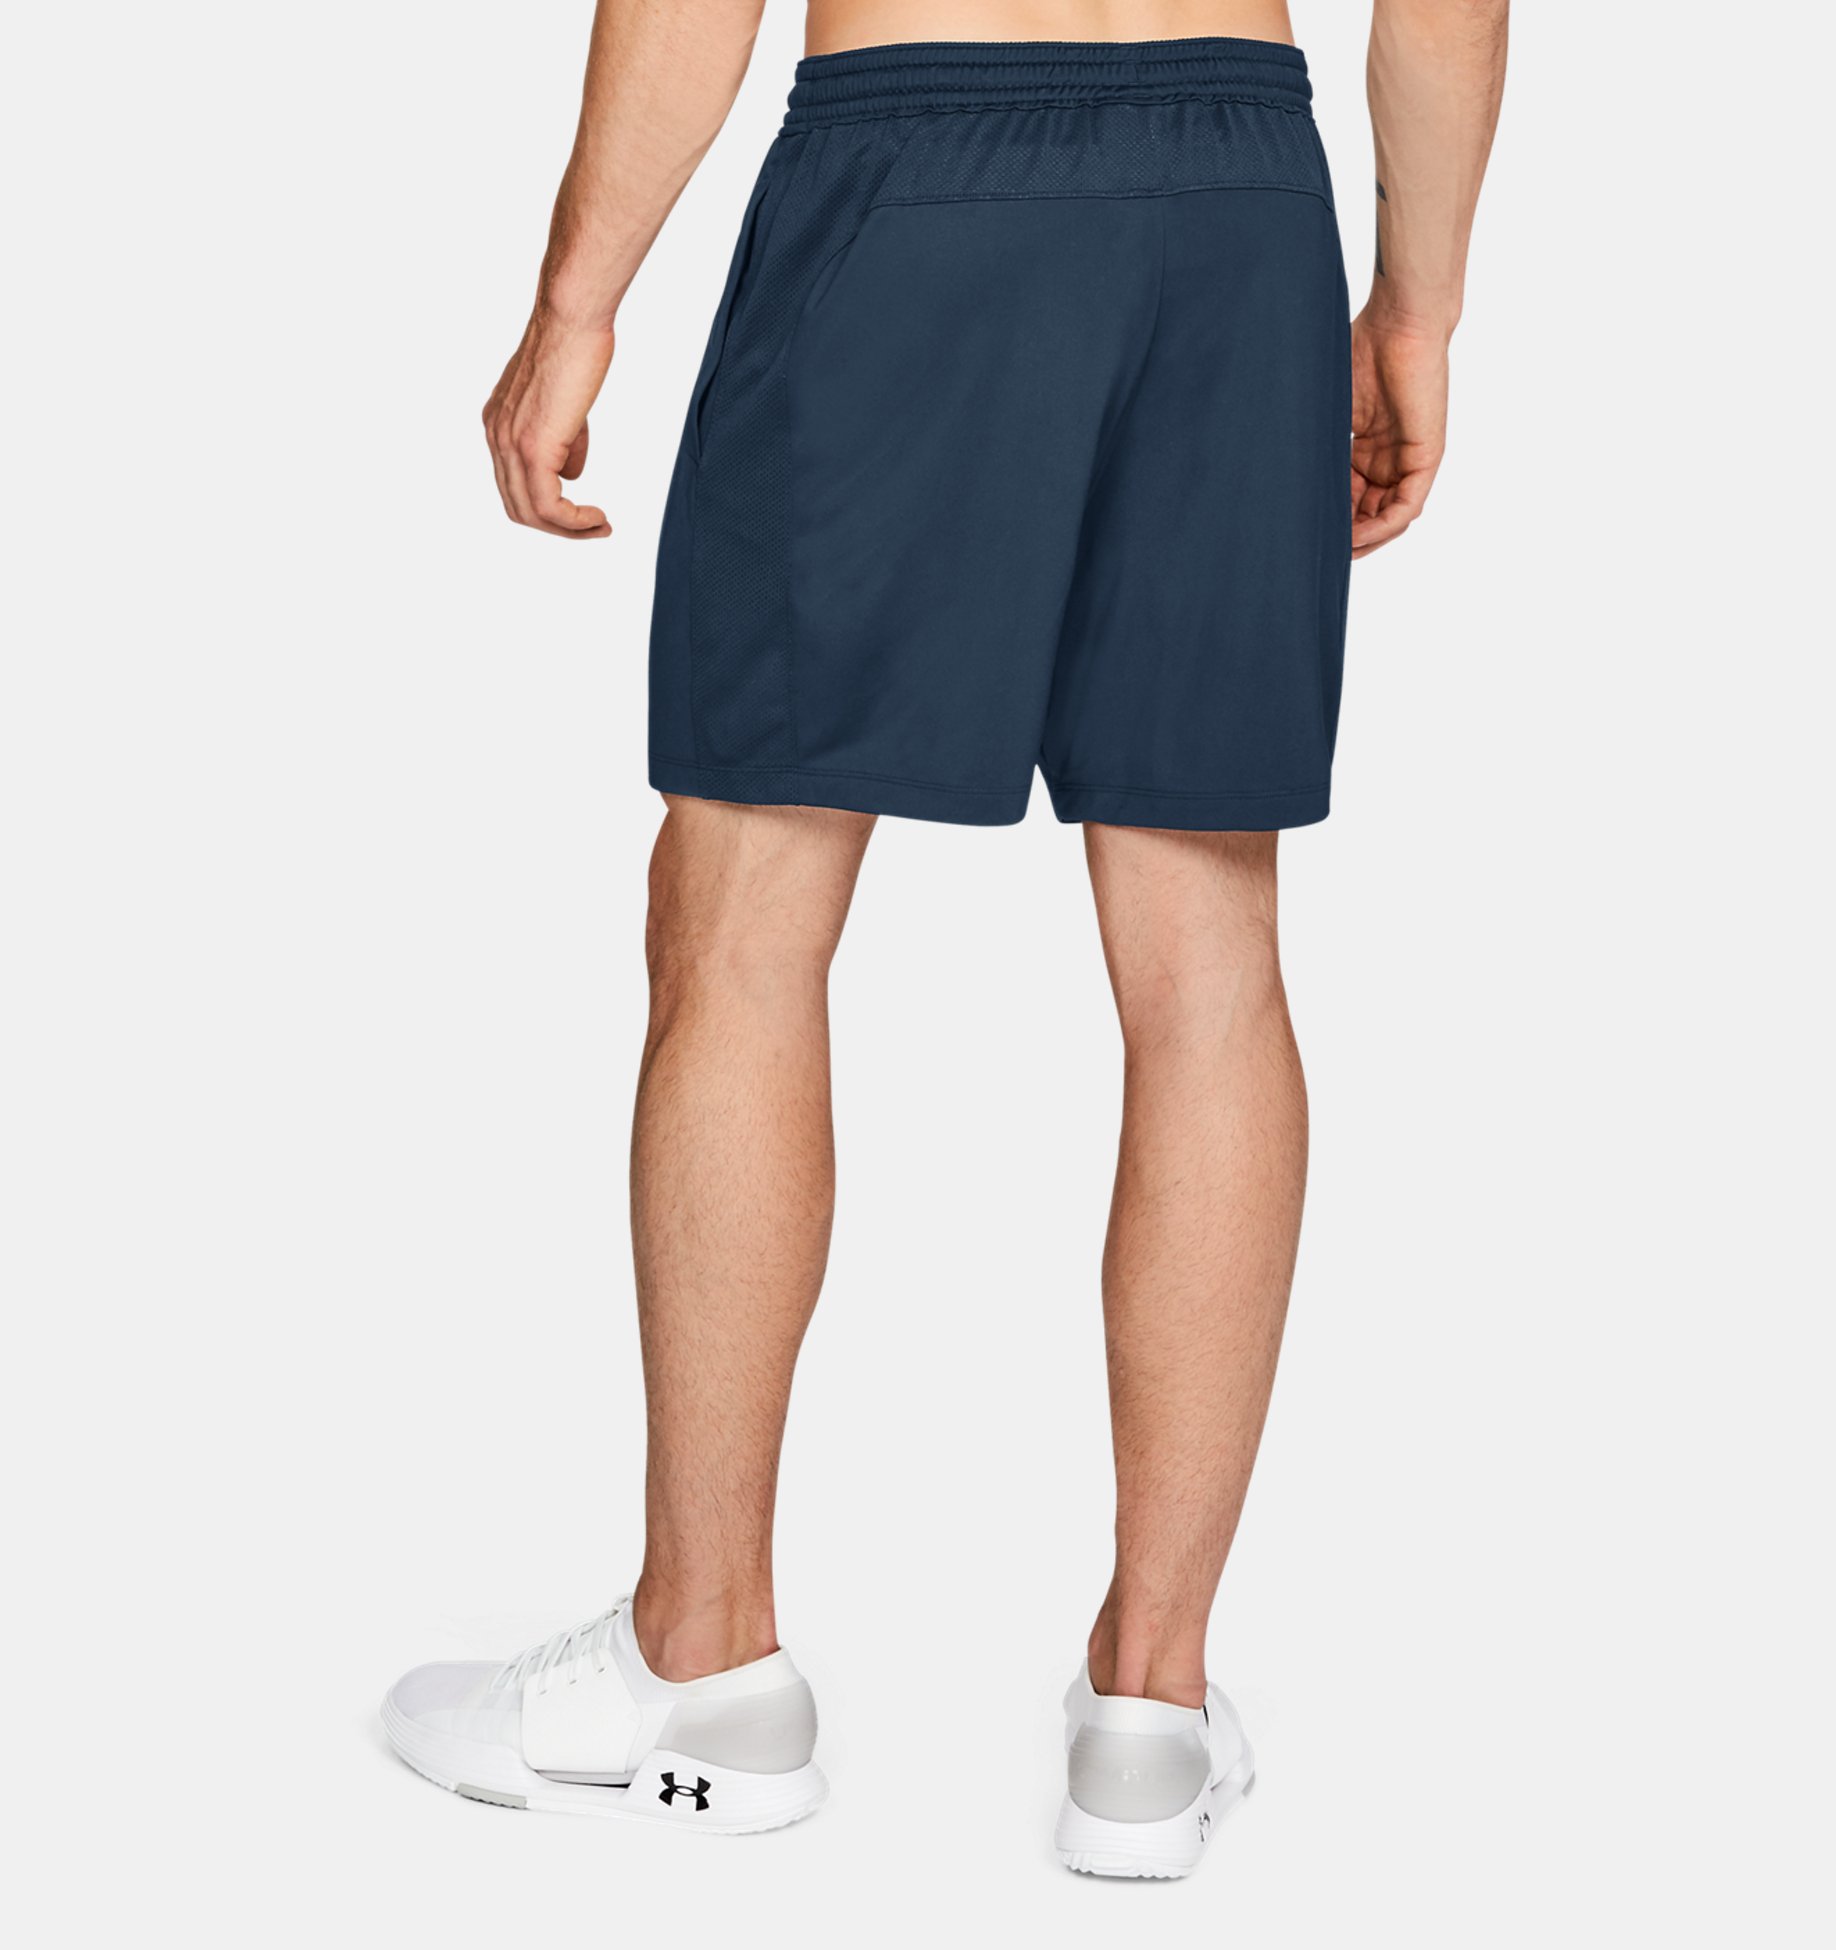 Under Armour Mens Mk1 Shorts Running Shorts Crafted with HeatGear Technology Modern Workout Shorts with Pockets and Tight Cut